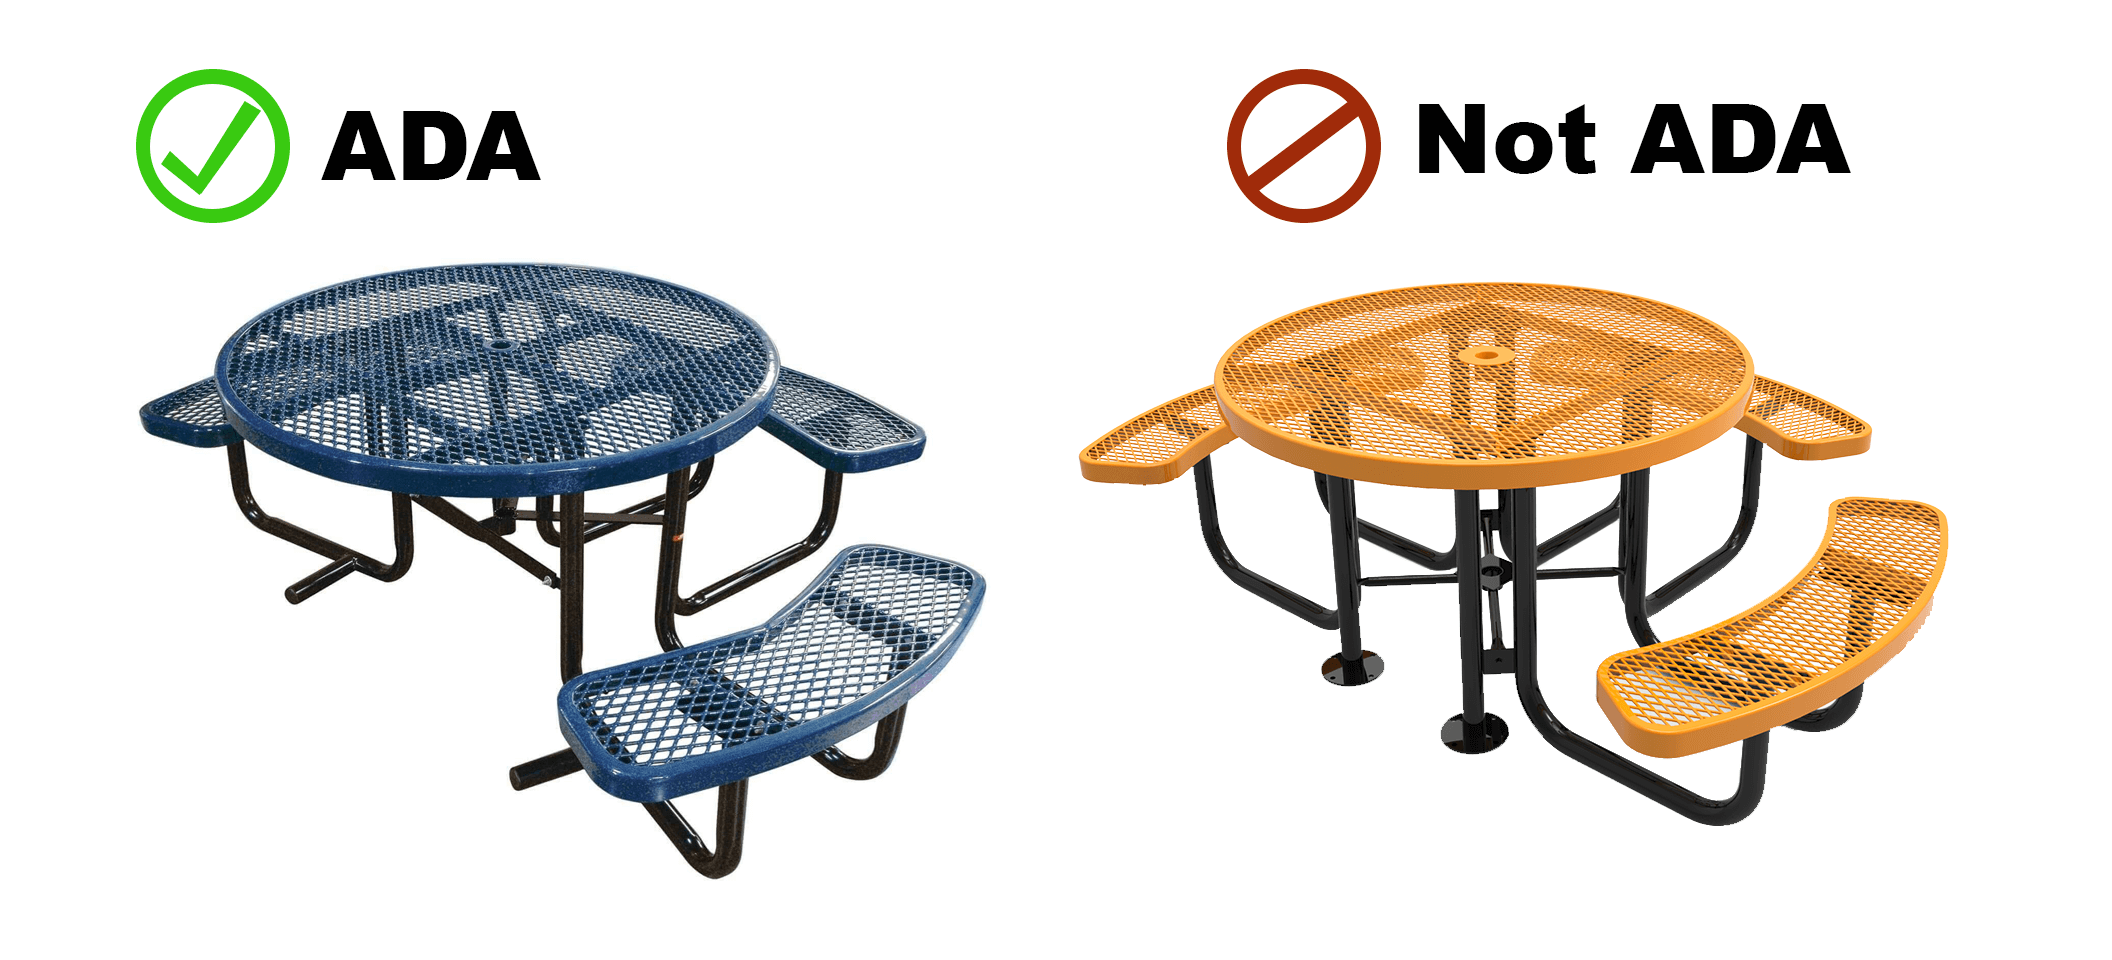 ADA picnic table compared to space saving picnic tables